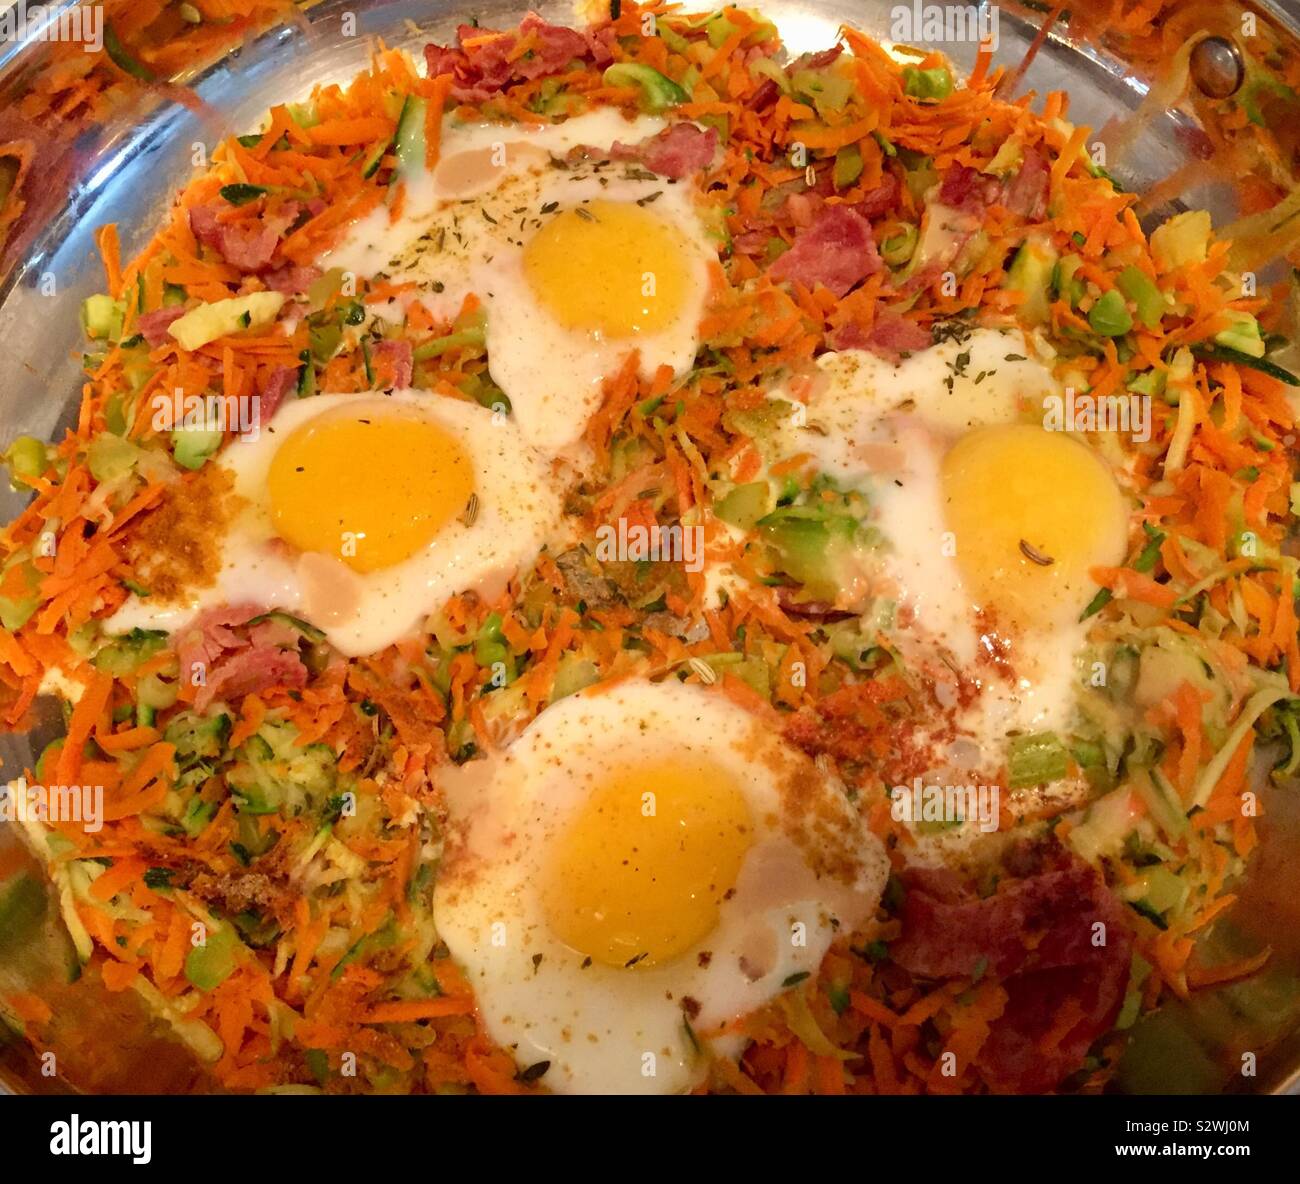 Eggs with turkey bacon and veggies in a skillet Stock Photo